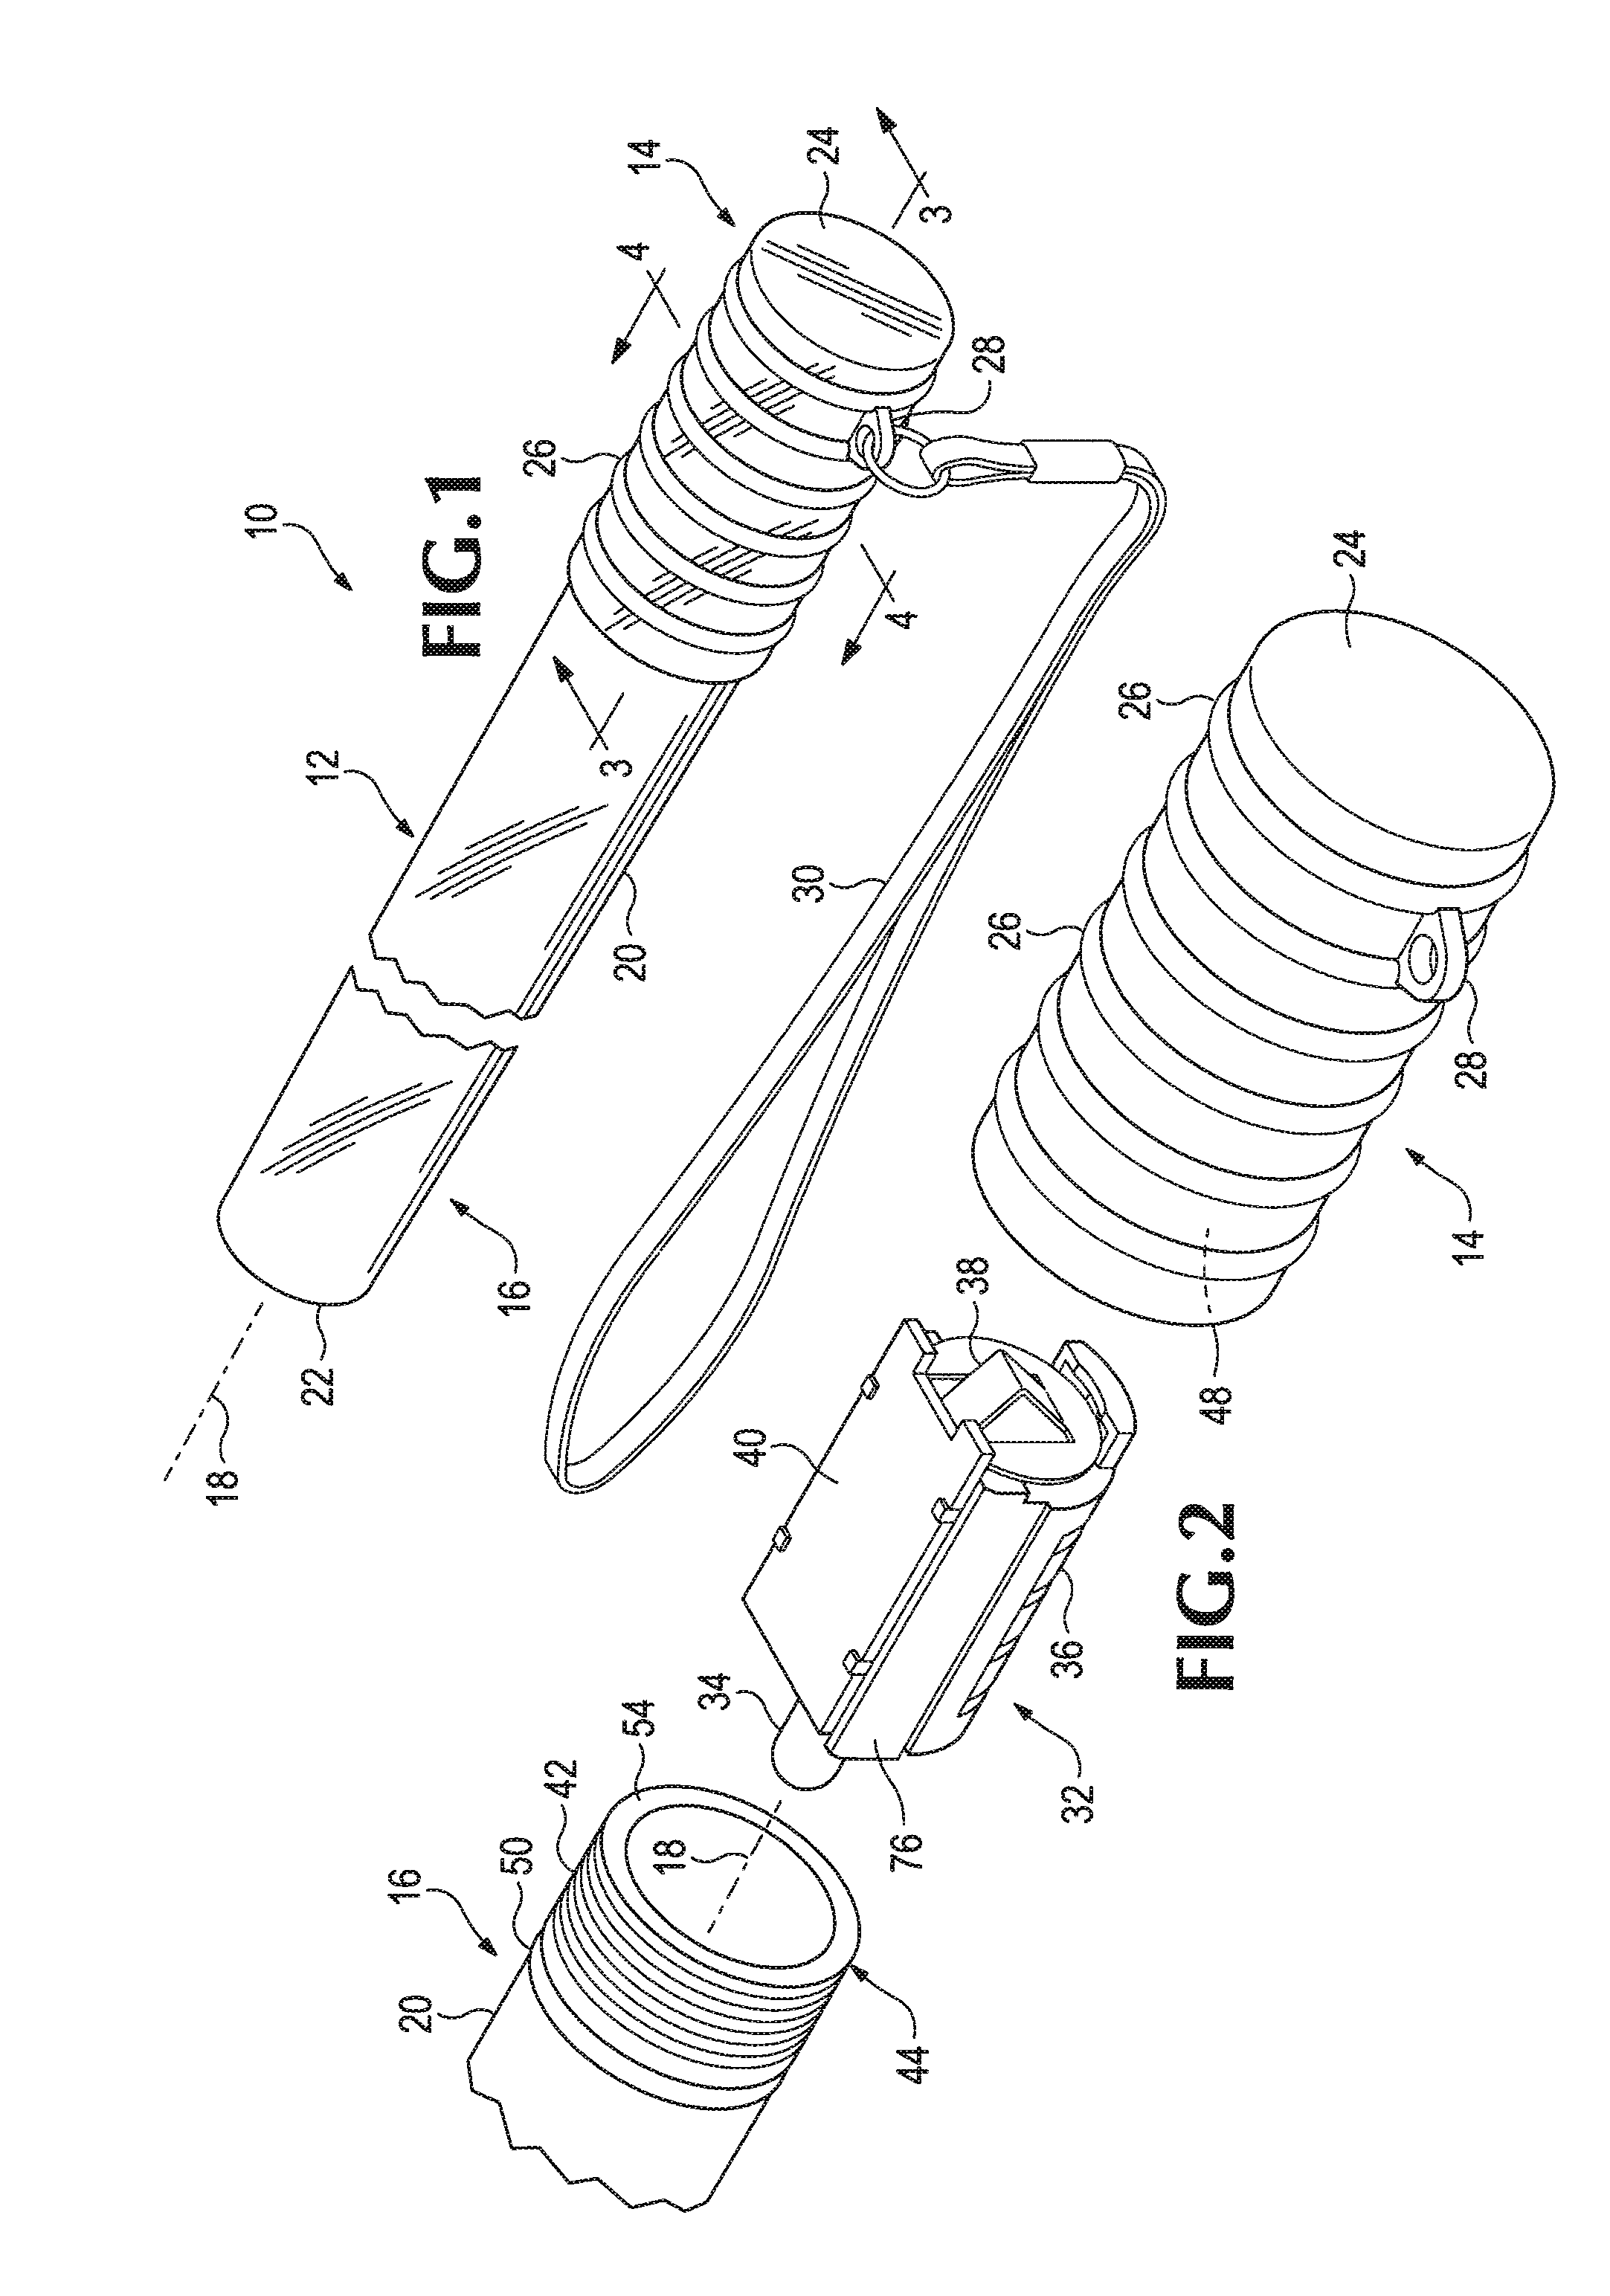 Electronic glow stick device with alternating flasher